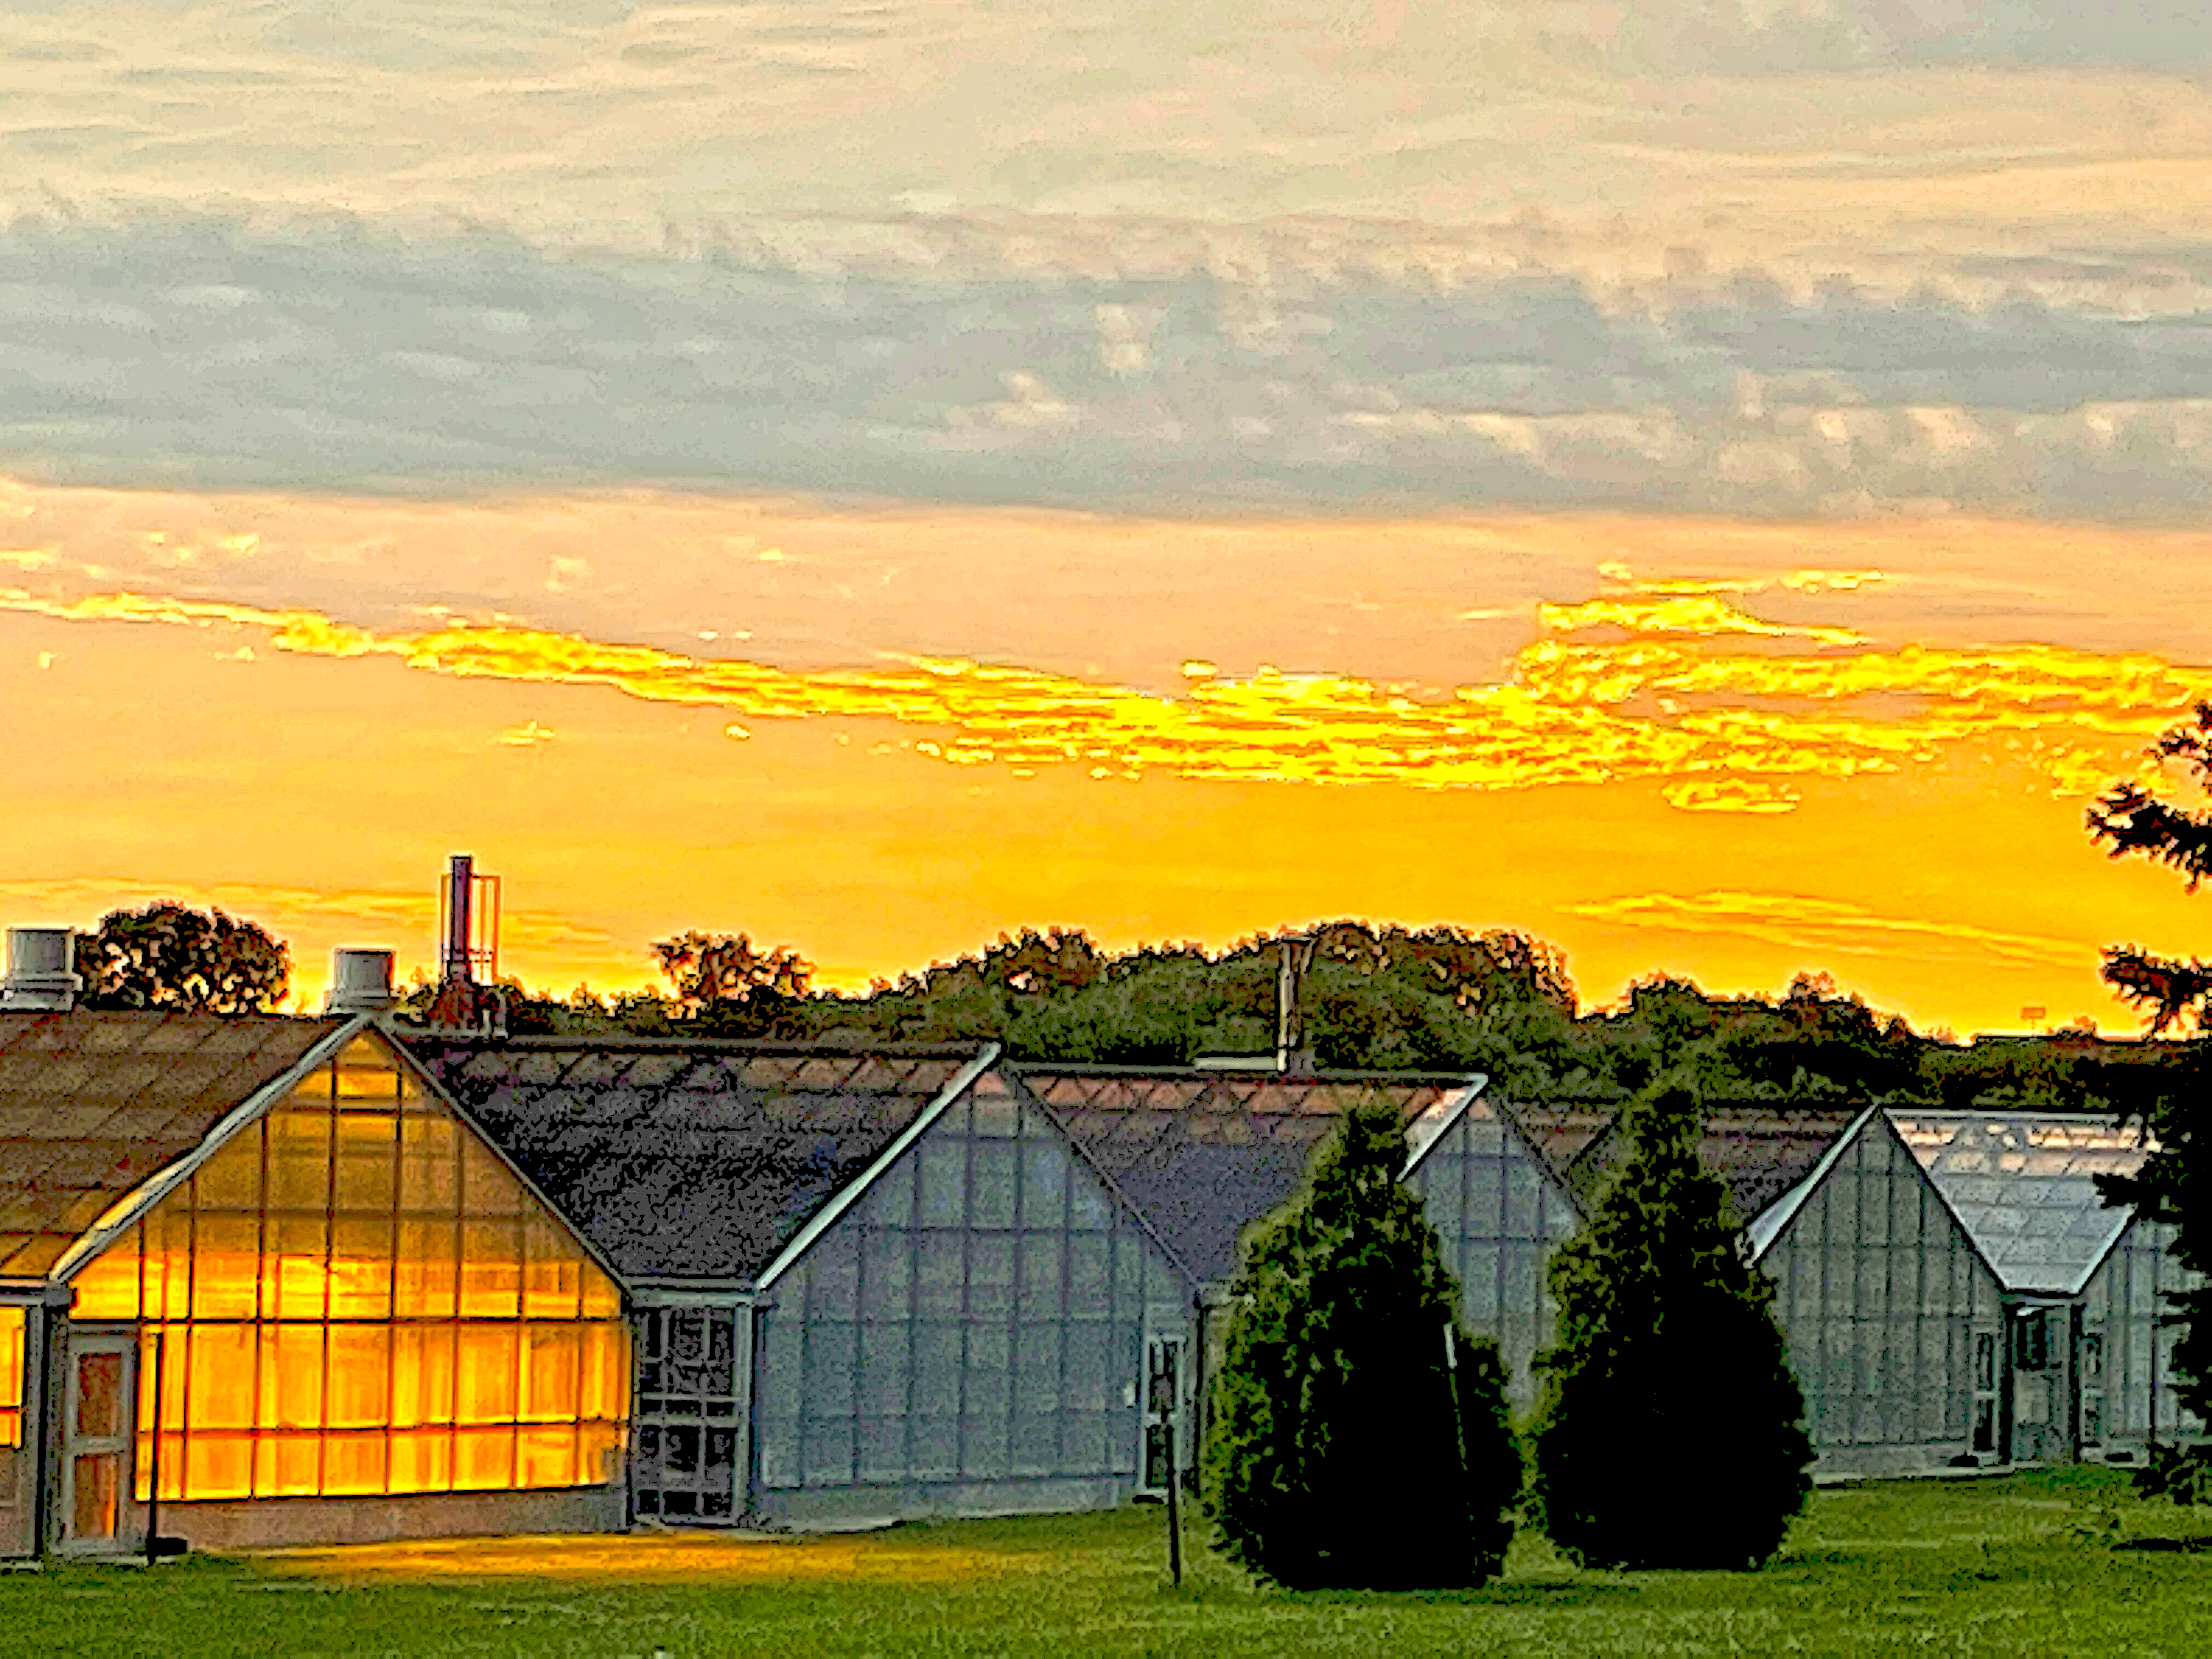 clouds illuminated by sunrise greenhouse illuminated by lighting on East campus